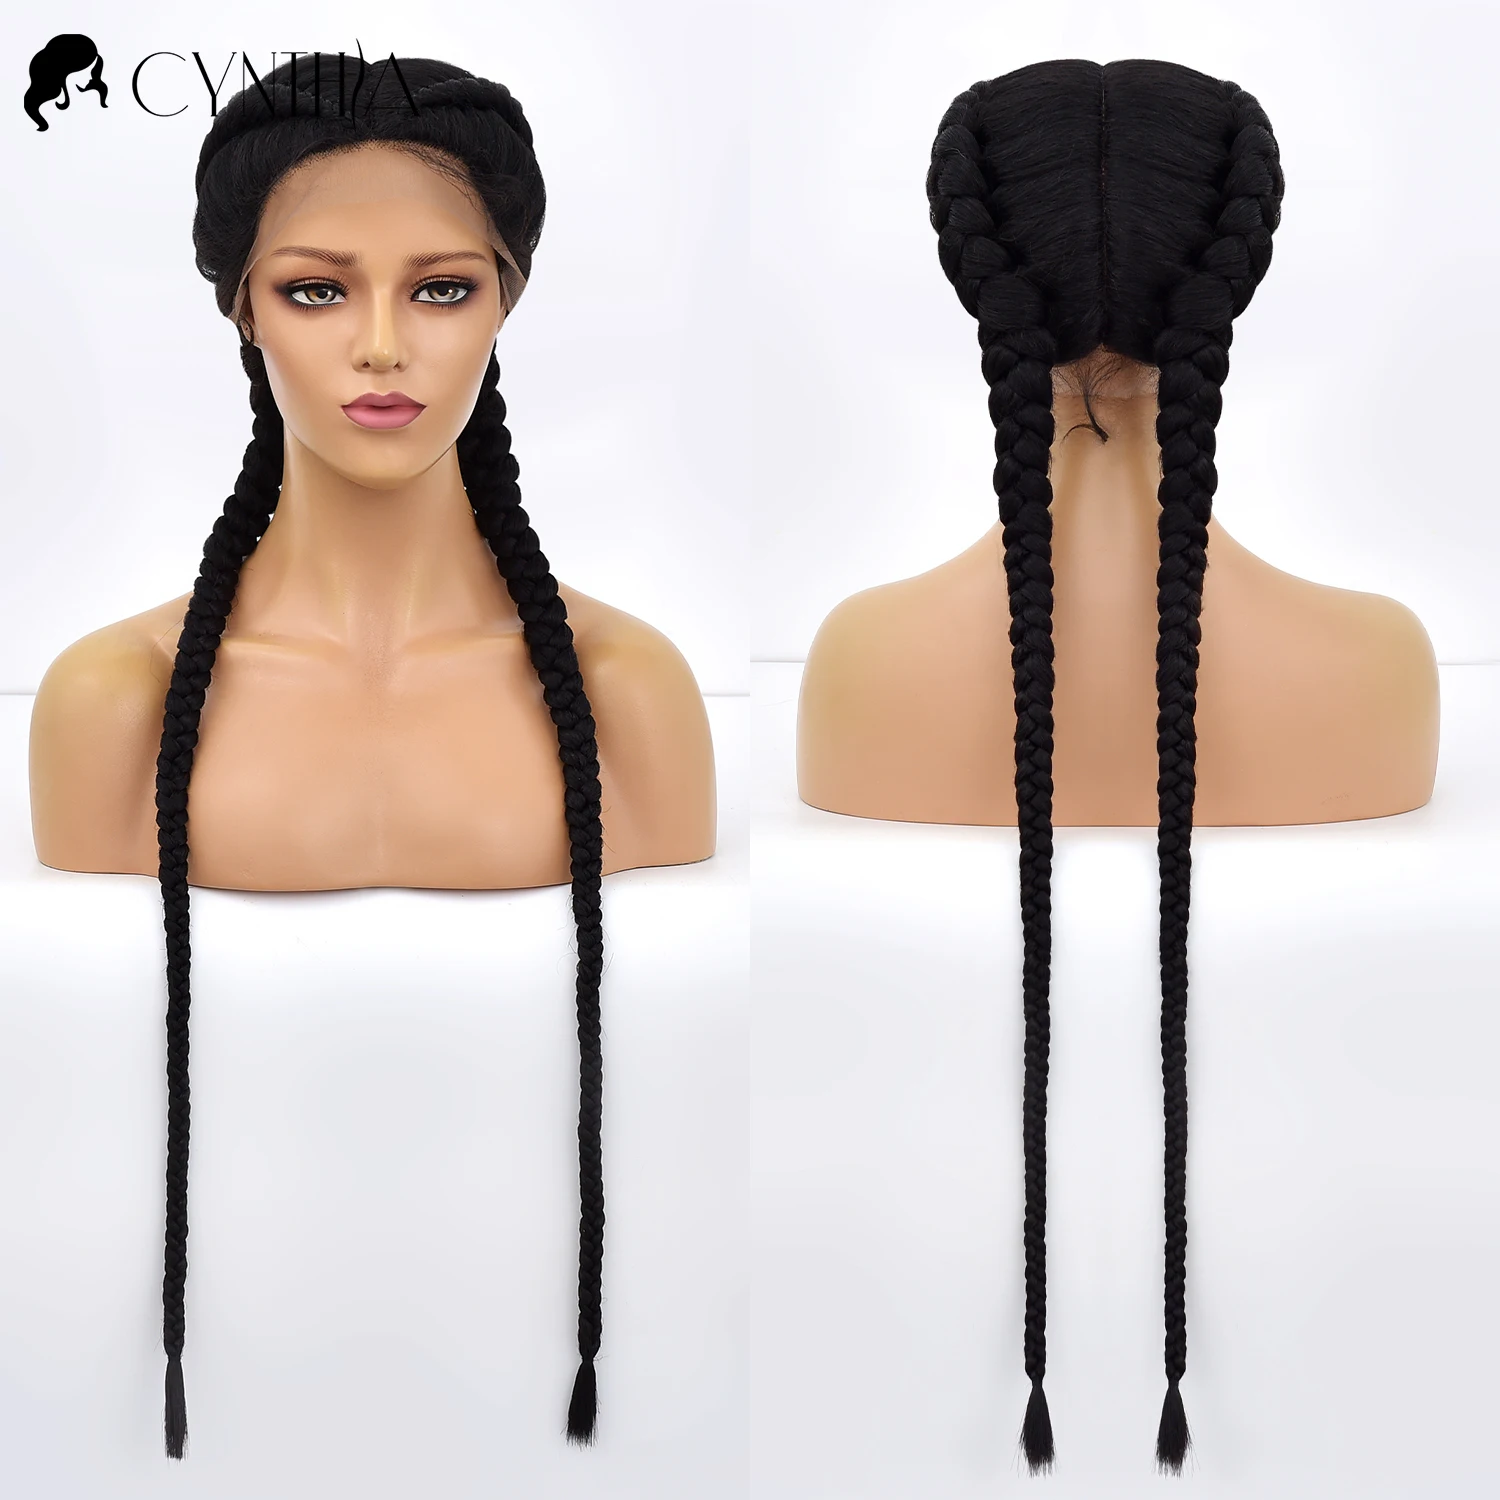 Braided Lace Front Wig Synthetic Wigs For Black Women 36 Inch Long Dutch Twins Braids With Baby Hair 360 Lace Frontal Perruque